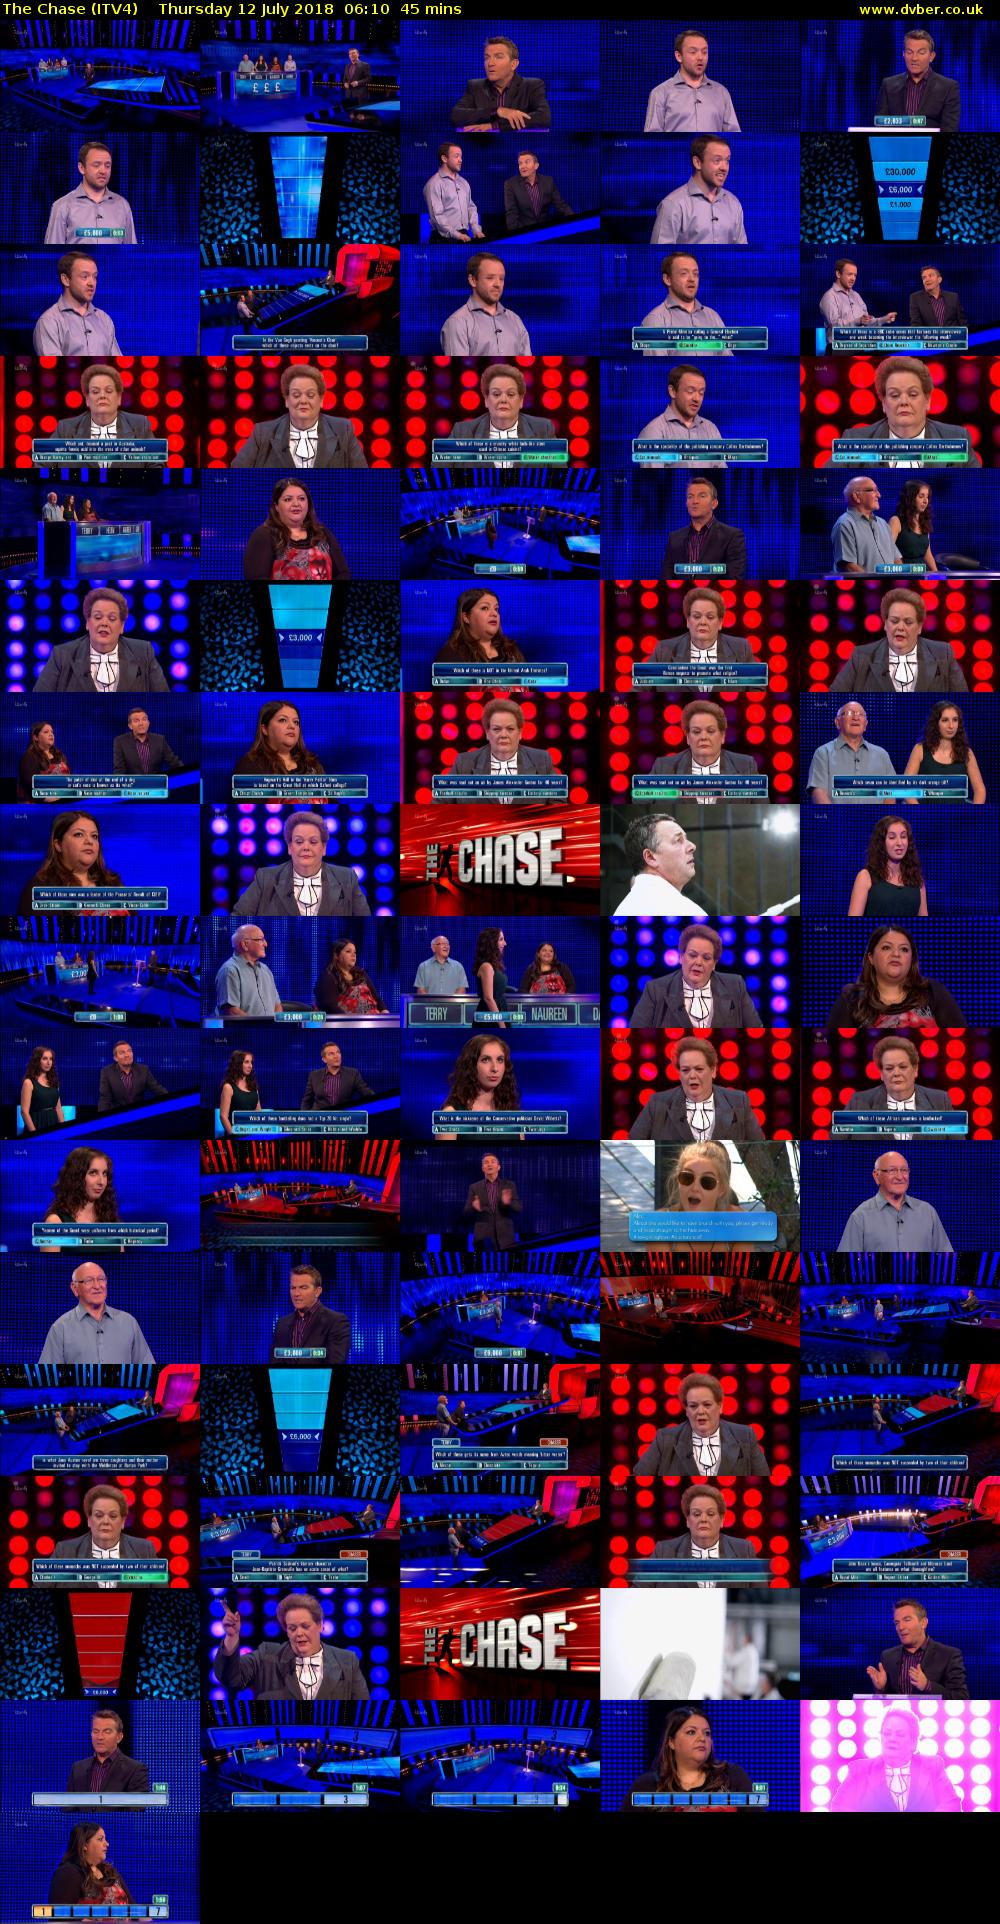 The Chase (ITV4) Thursday 12 July 2018 06:10 - 06:55